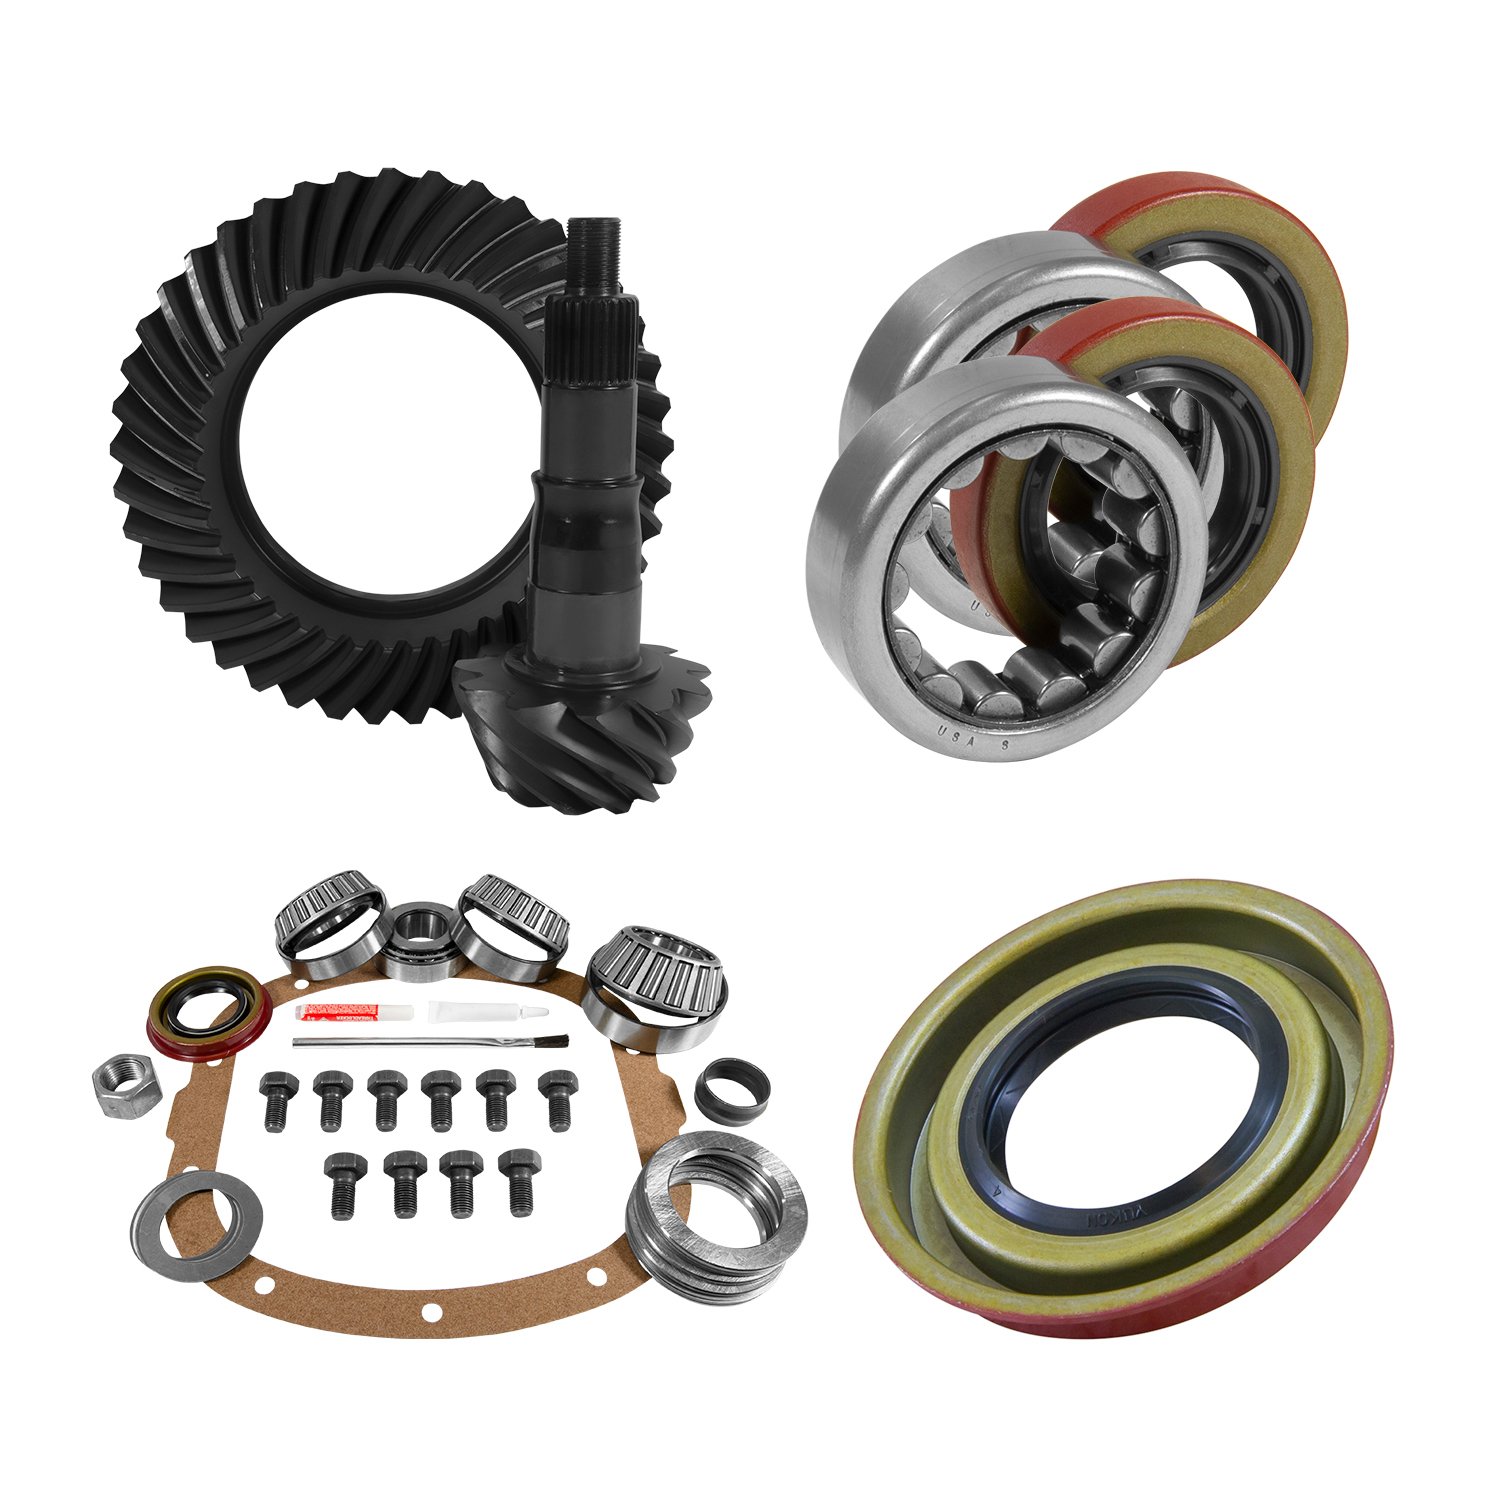 USA Standard 10690 7.5 in./7.625 in. GM 3.08 Rear Ring & Pinion Install Kit, 2.25 in. Od Axle Bearings